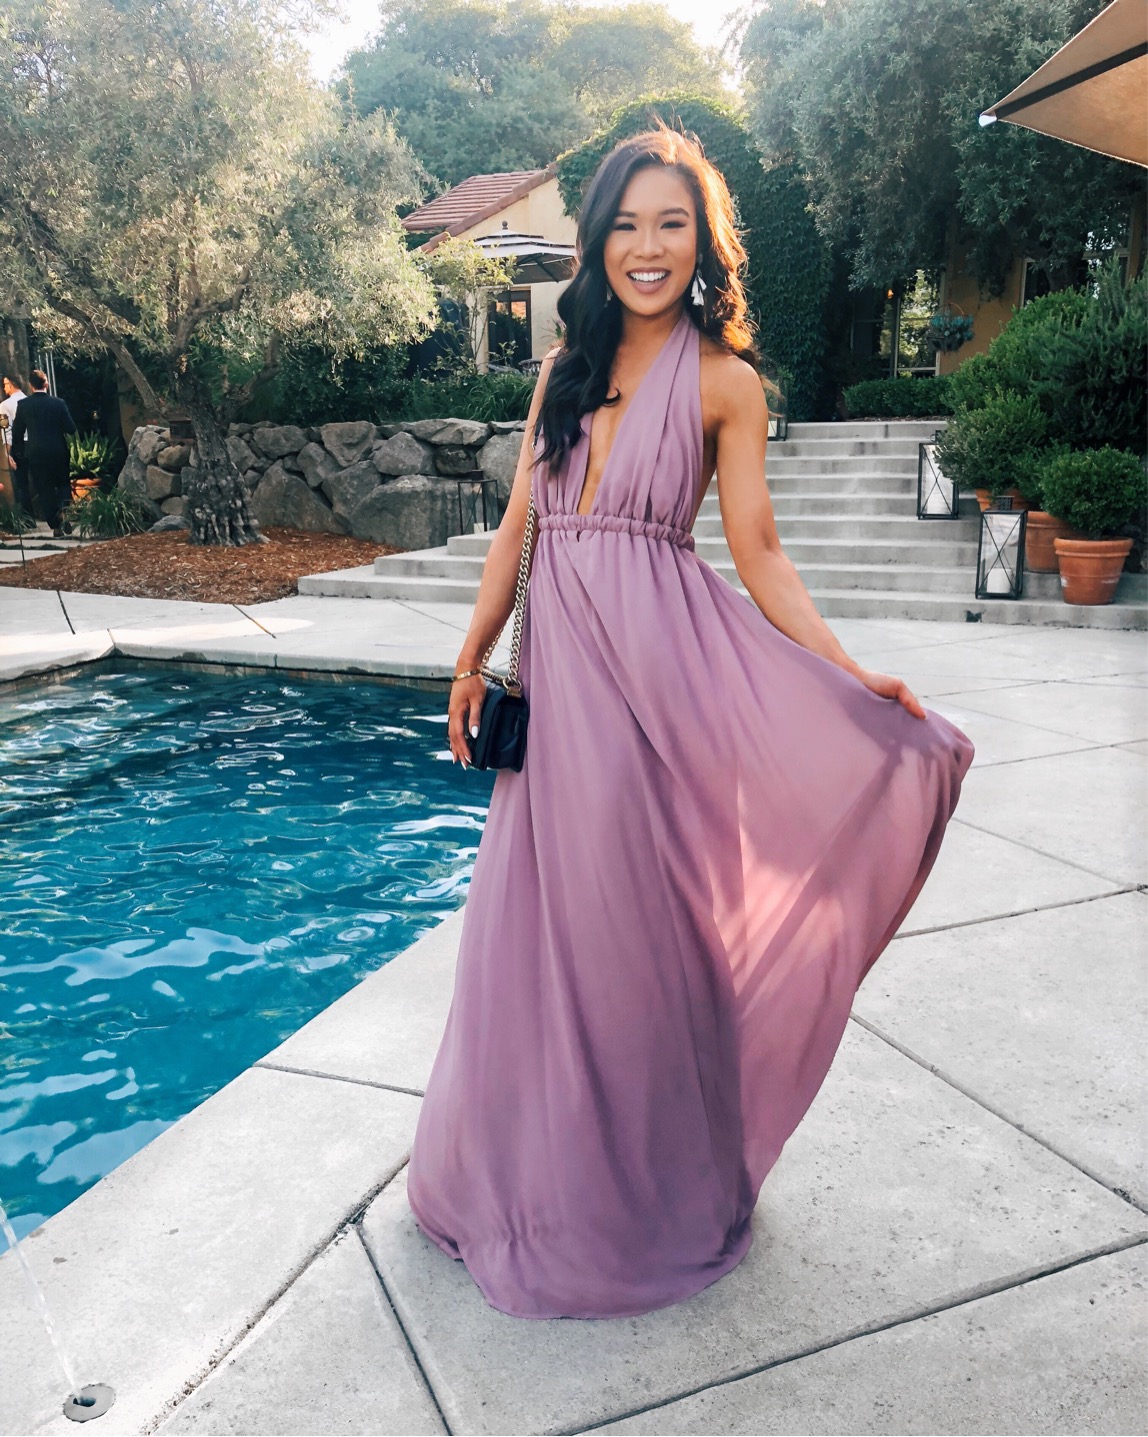 Mauve halter dress with white tassel earrings for wedding guest style